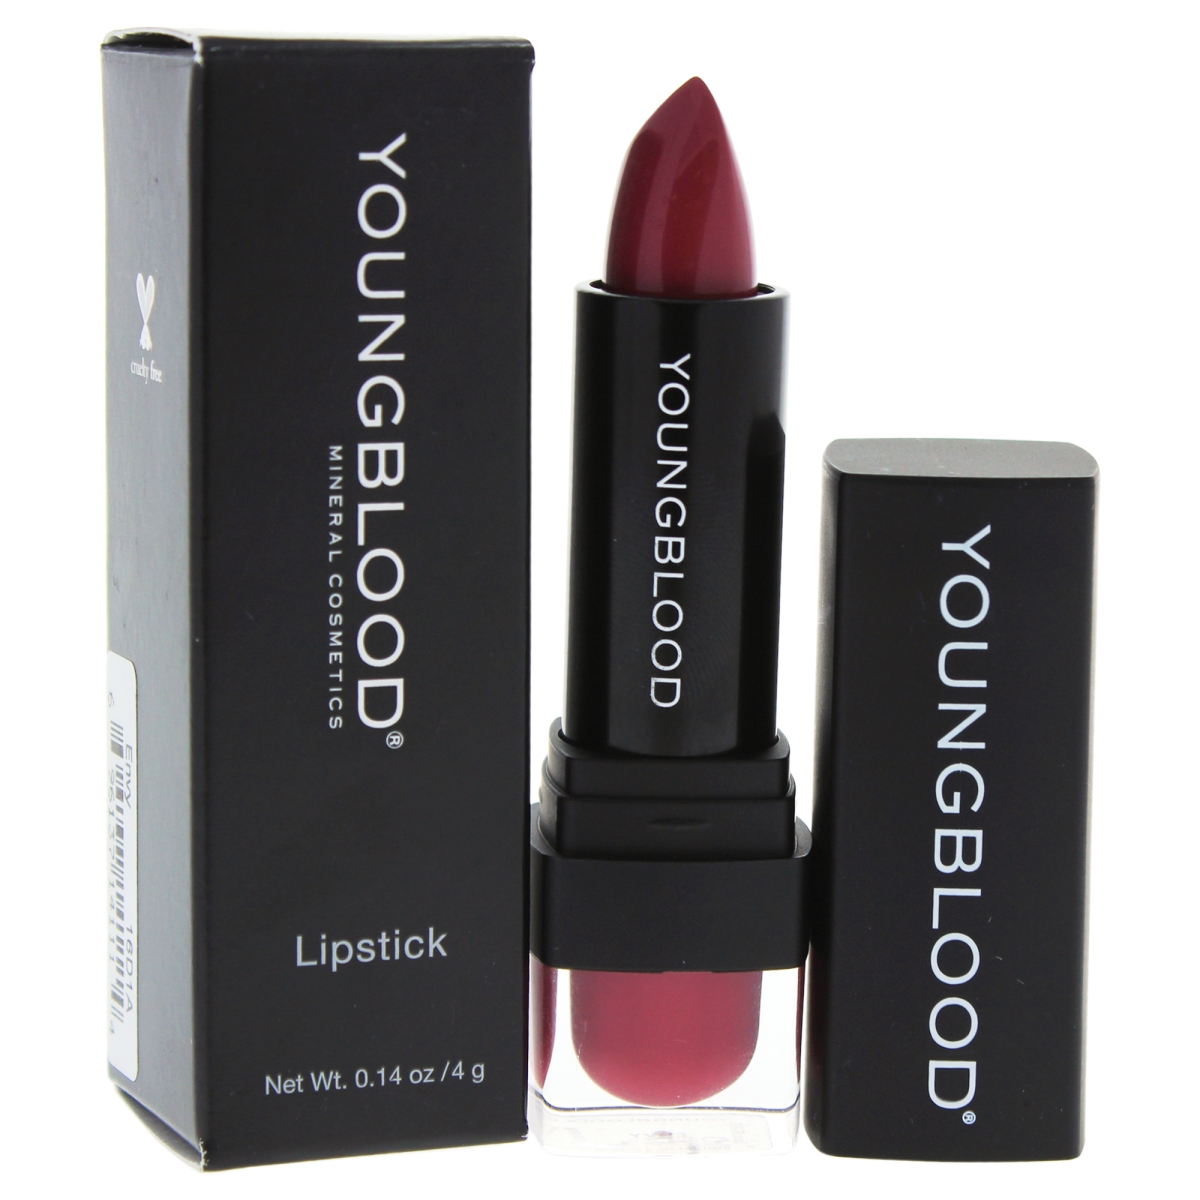 Picture of Youngblood W-C-12000 Lipstick - Envy for Women - 0.14 oz